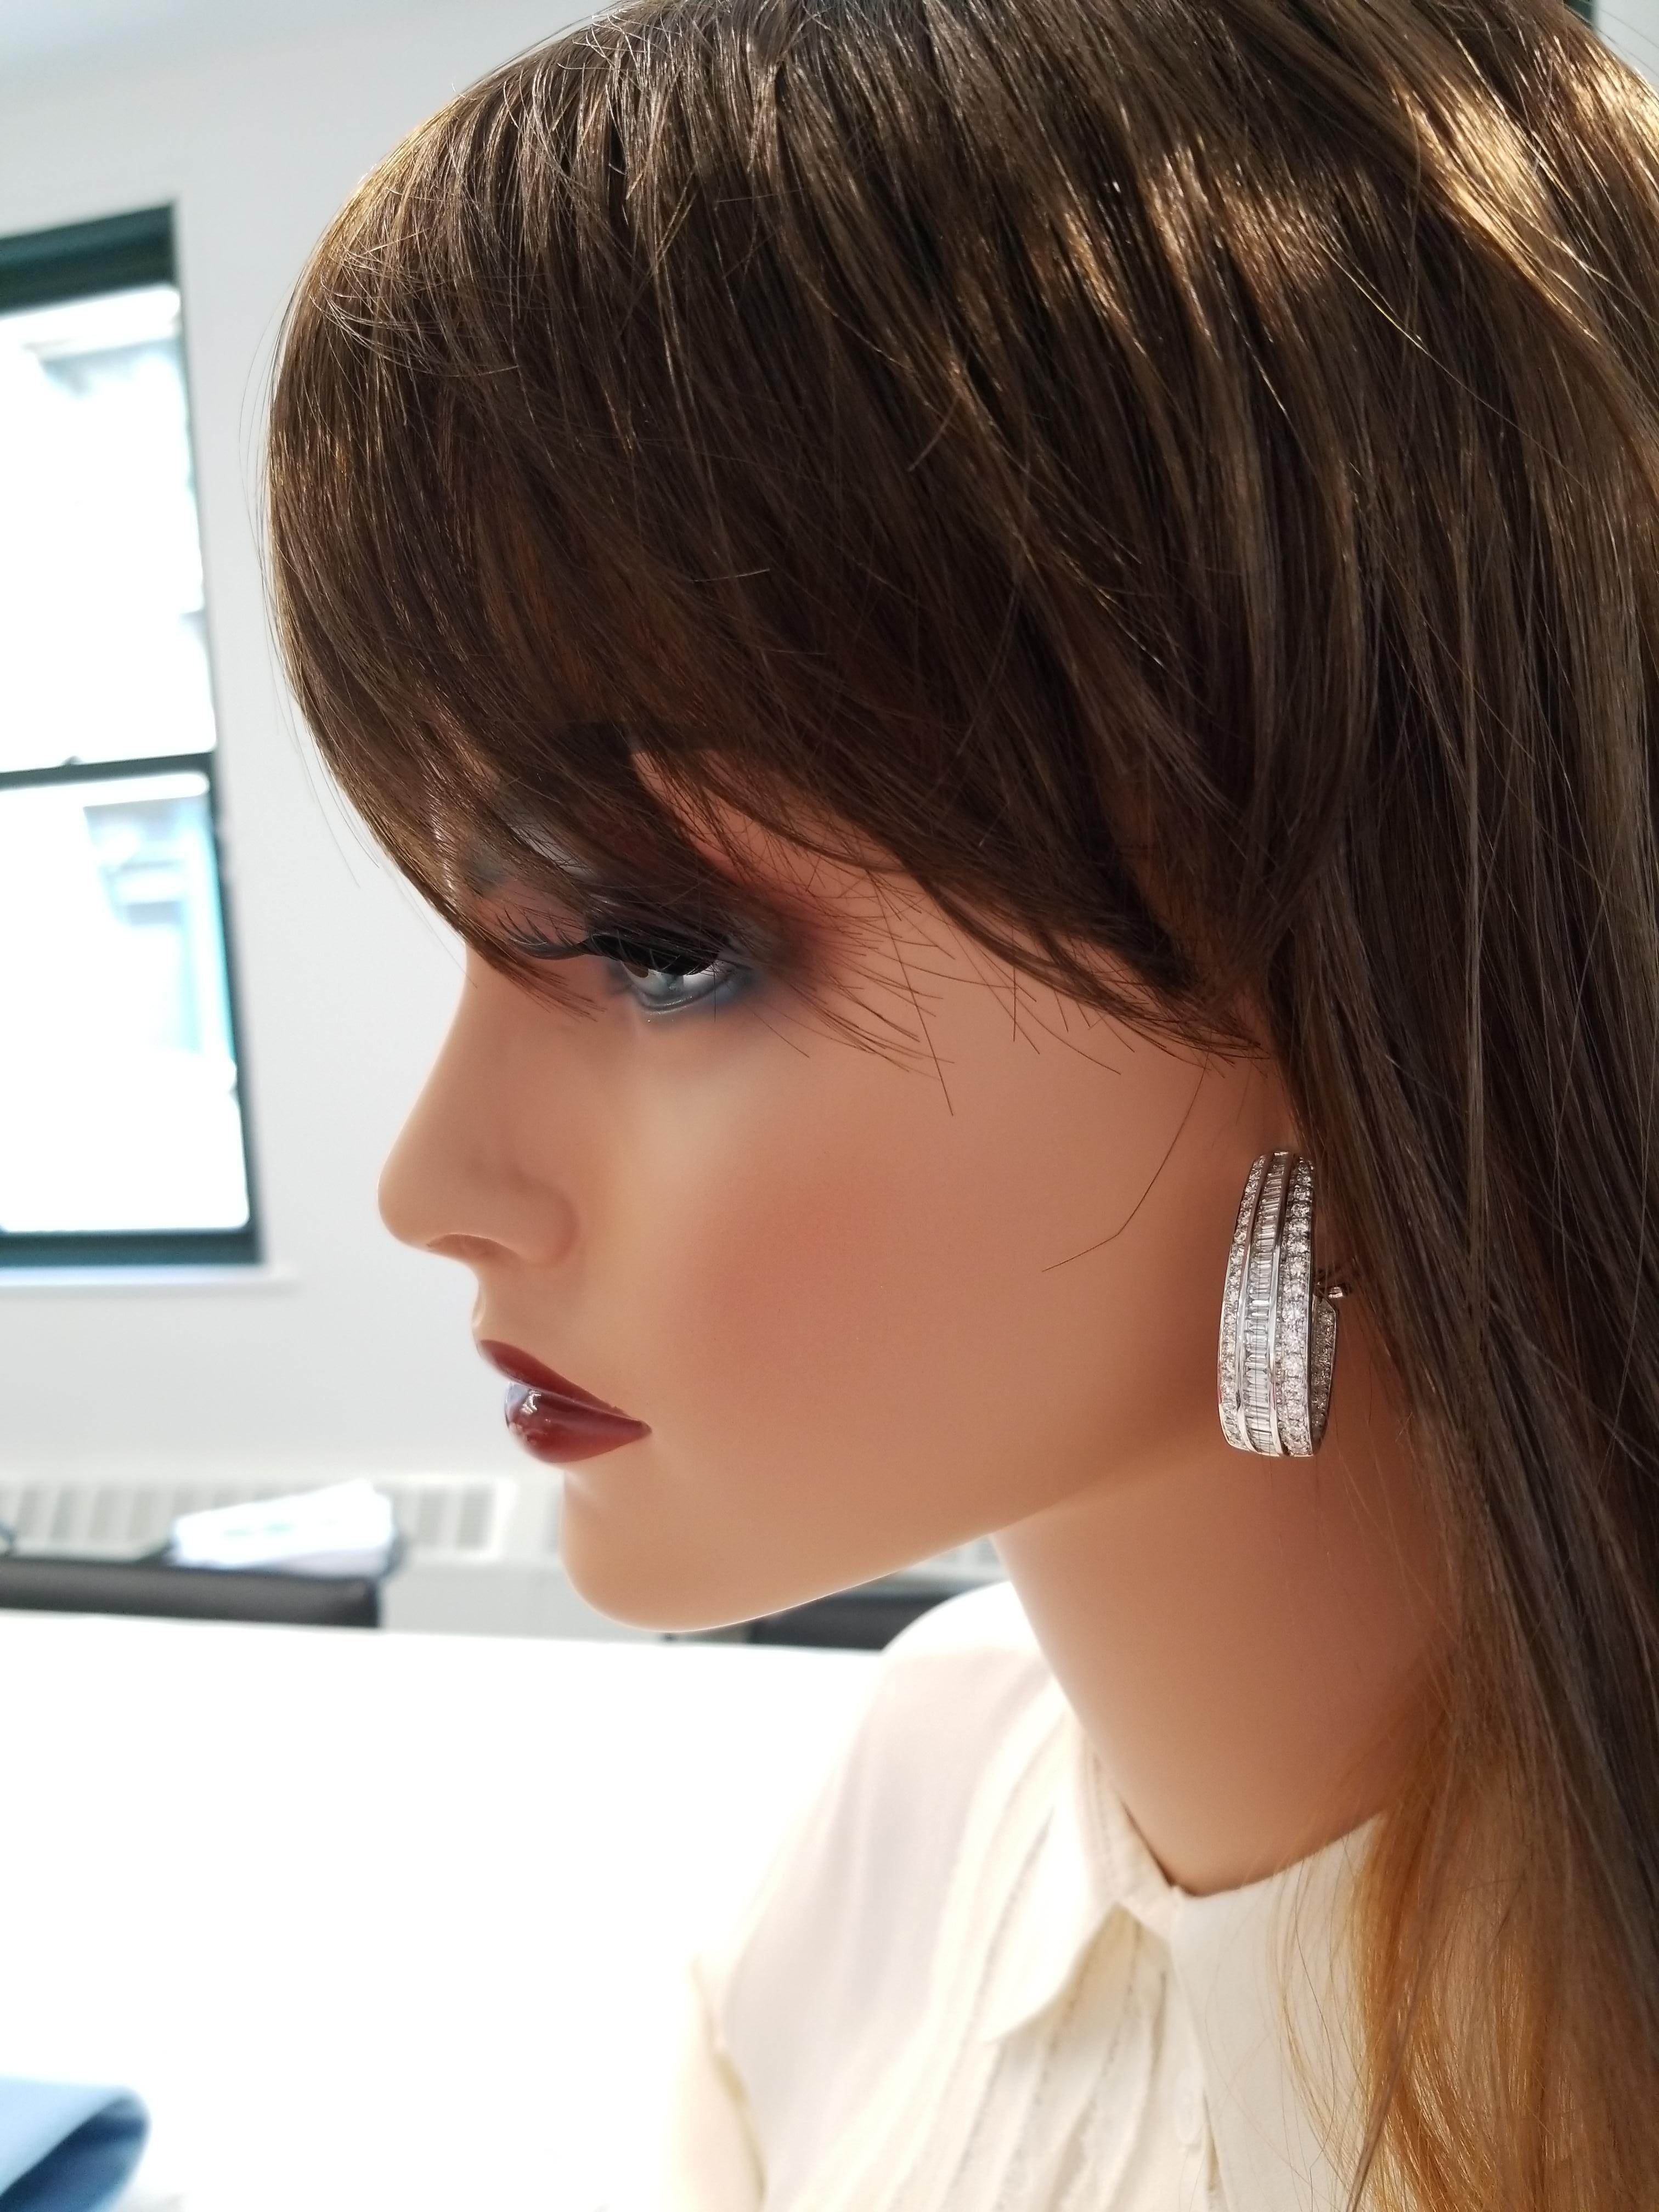 These are fancy J-shaped inside-outside hoop earrings. 178 shimmering baguette cut and contrasting round brilliant cut diamonds are channel set in three rows totaling 7.74 carats set on the front as well as the inside of the hoops. Crafted in